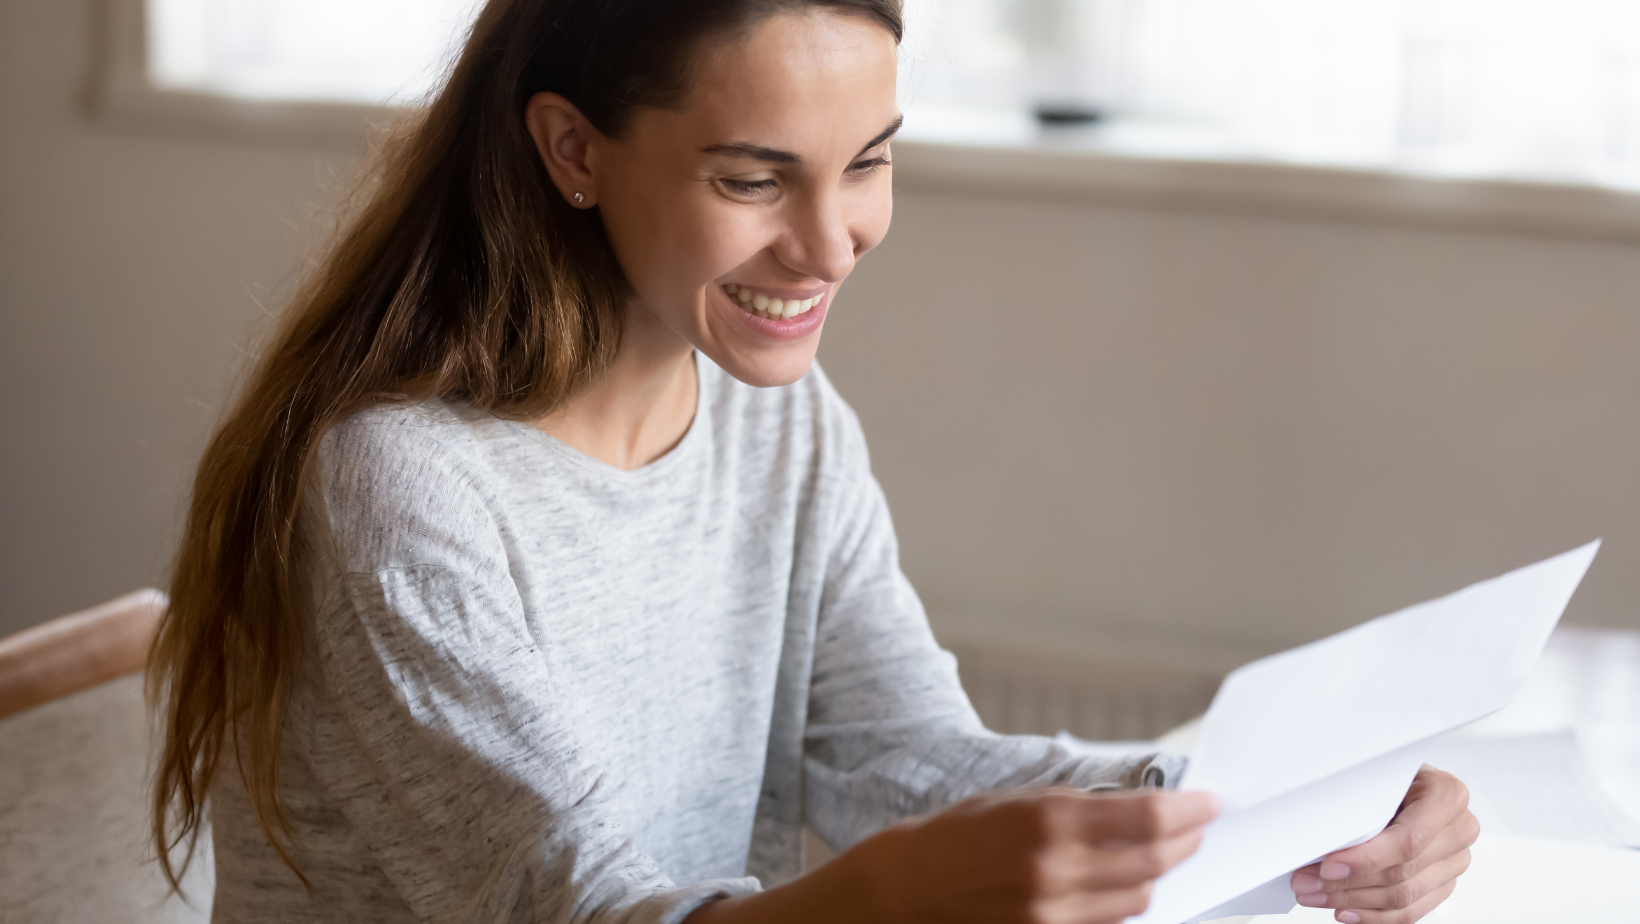 Middle aged woman looking at a piece of paper, smiling